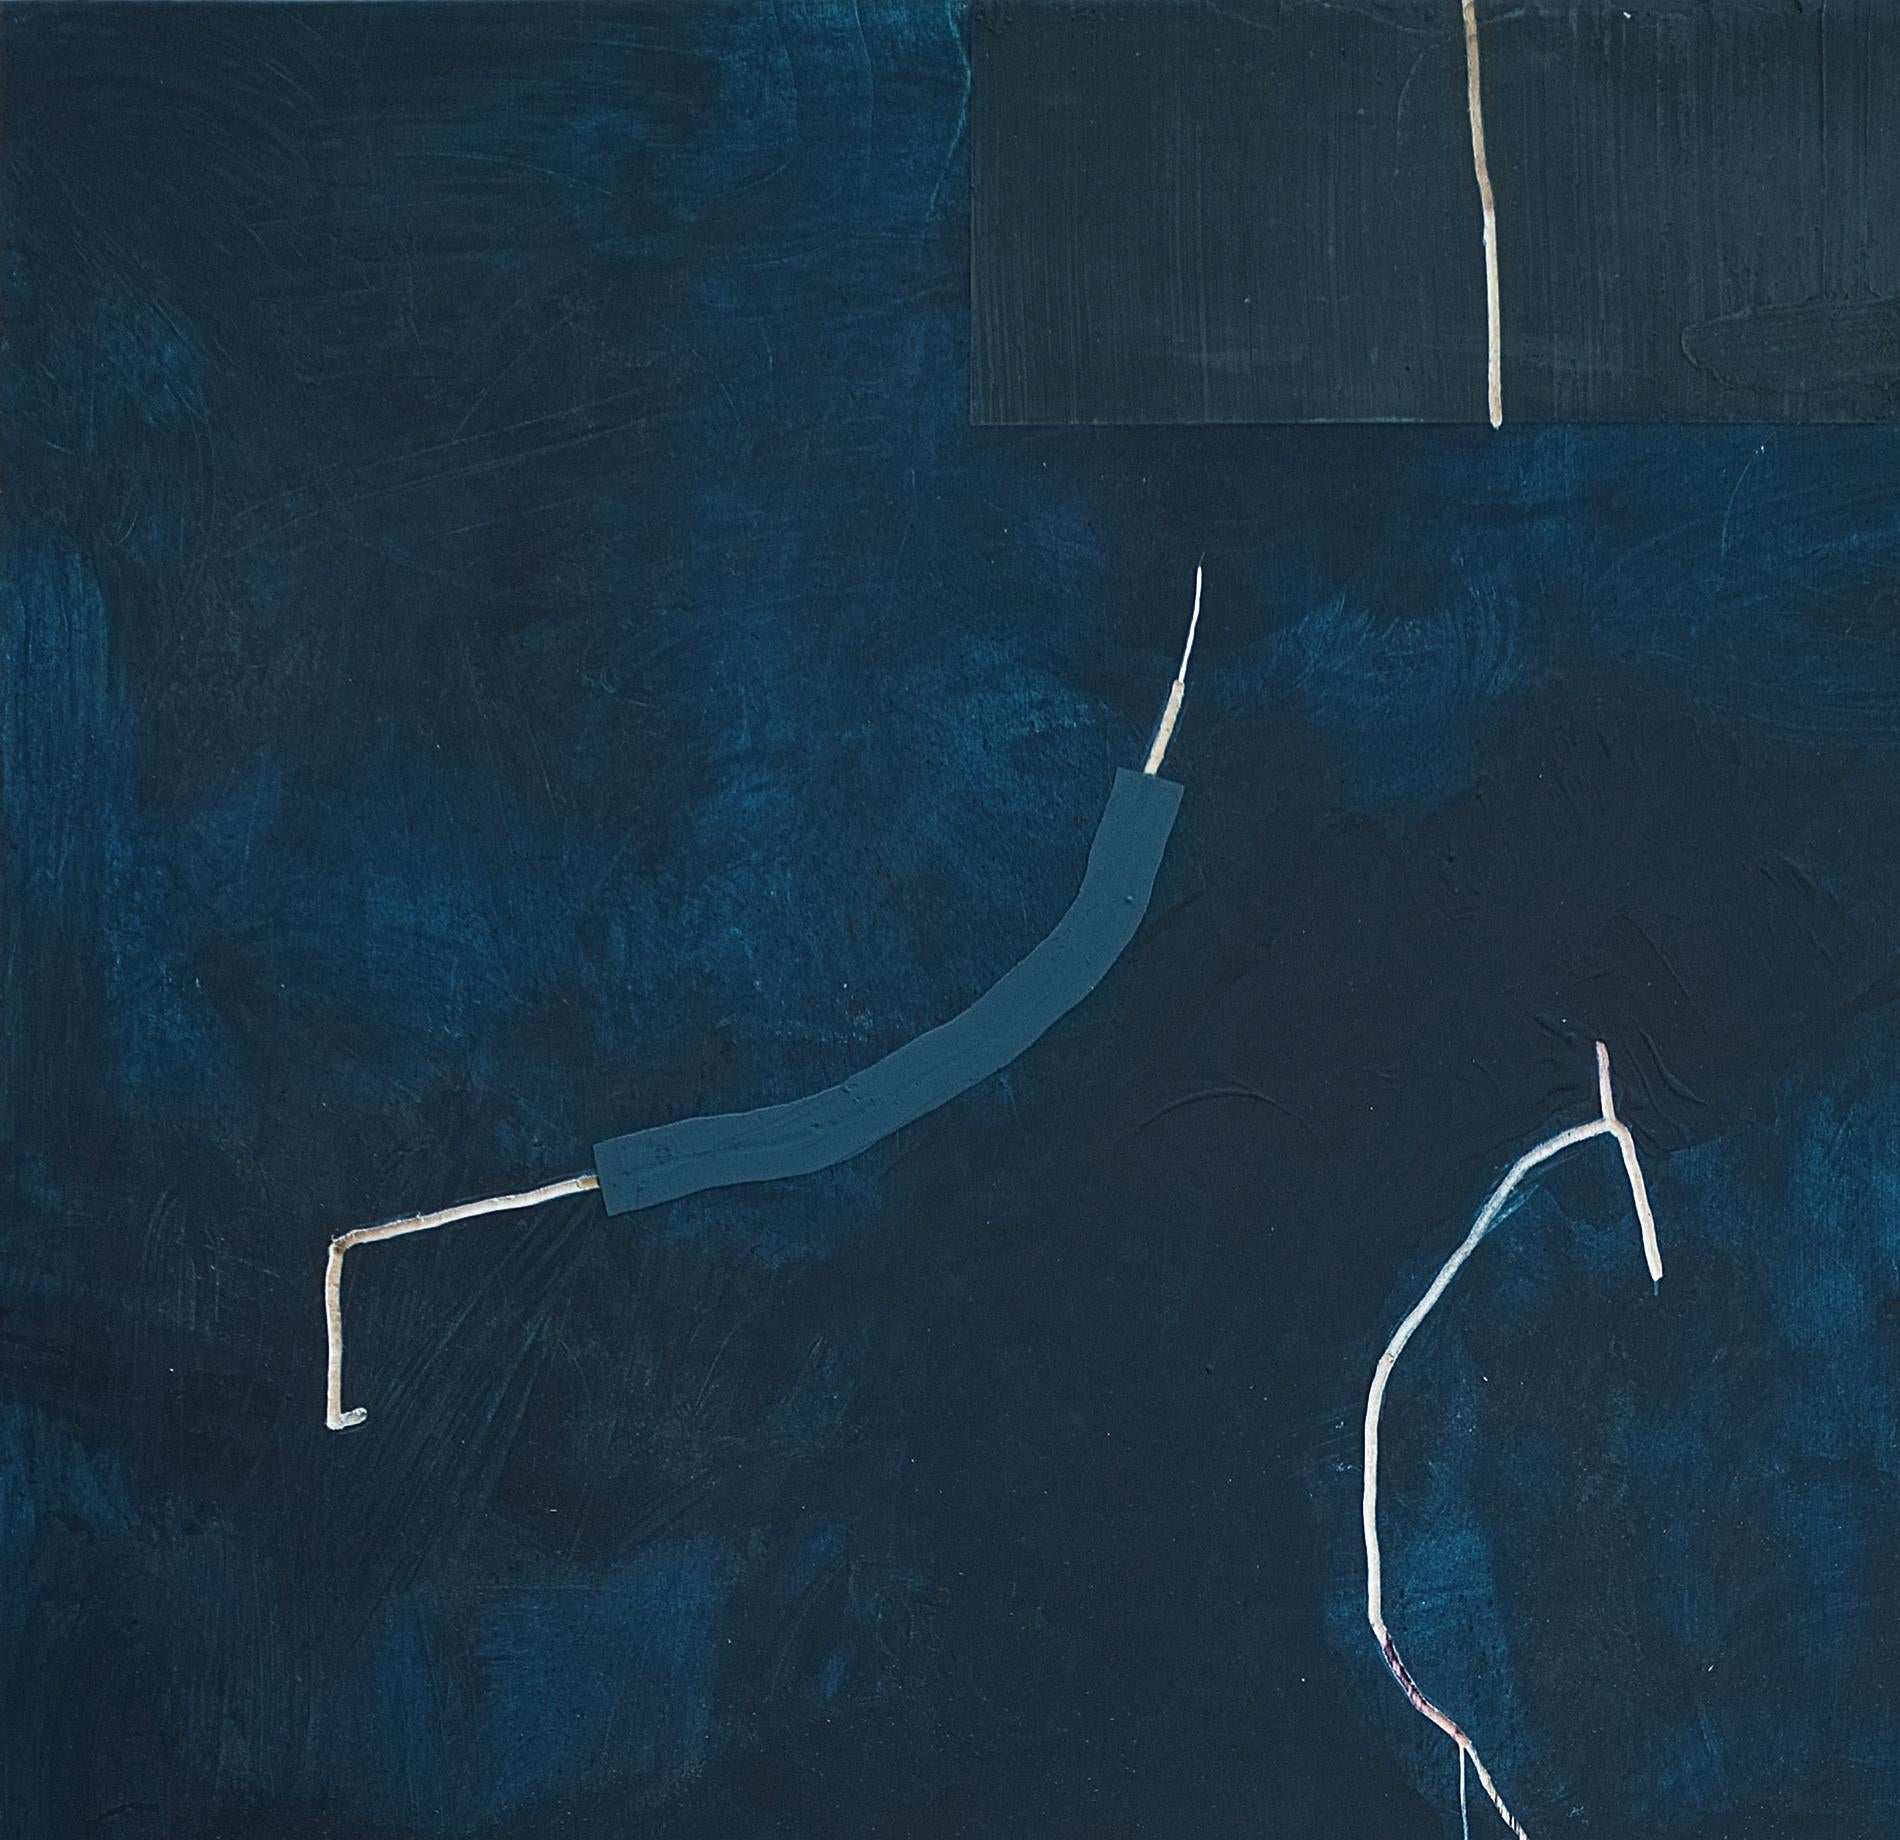 'Black and blue residue 3' is an abstract minimalist acrylic painting on plywood panel by French artist - Antoine Puisais. It is a medium size dar blue and black contemporary art piece with a monochromatic design and authentic, raw aesthetic. Its